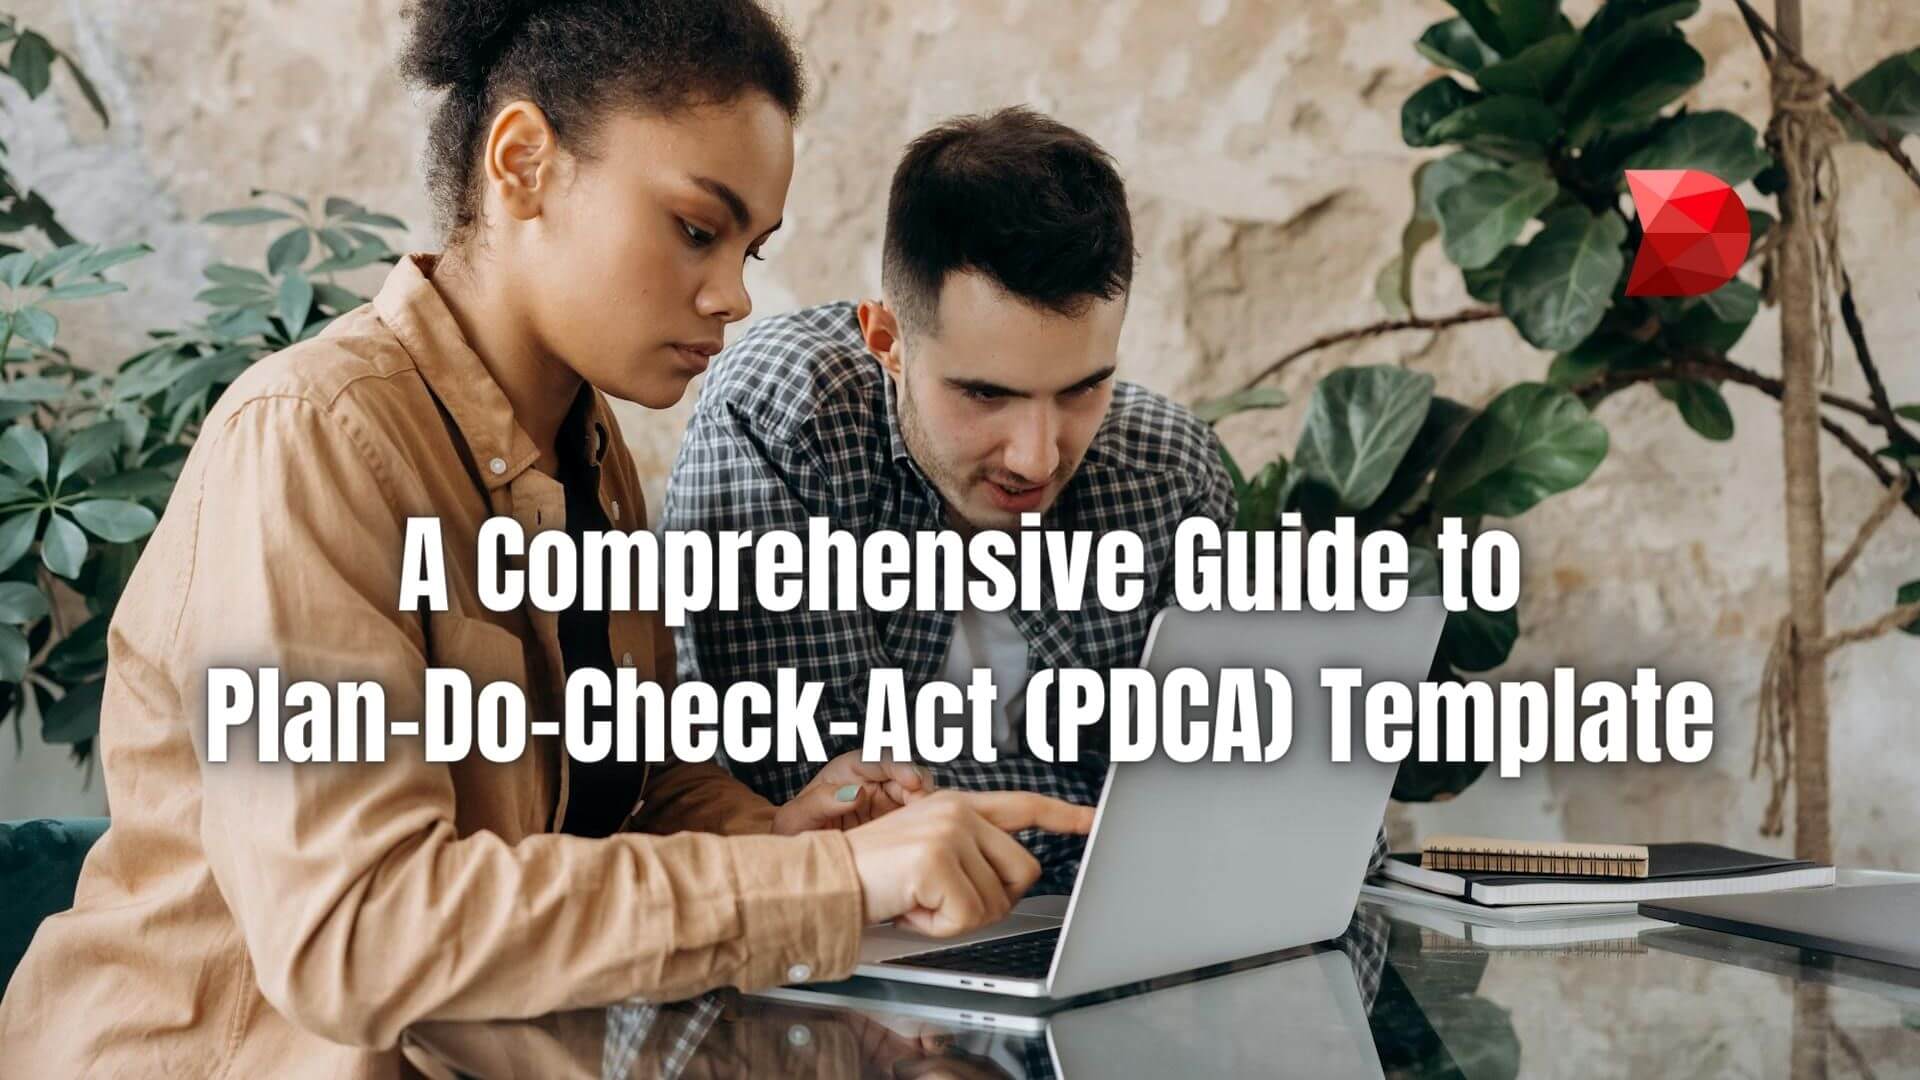 Enhance accountability, minimize errors, and accelerate progress. Drive success with our PDCA (Plan-Do-Check-Act) template guide.